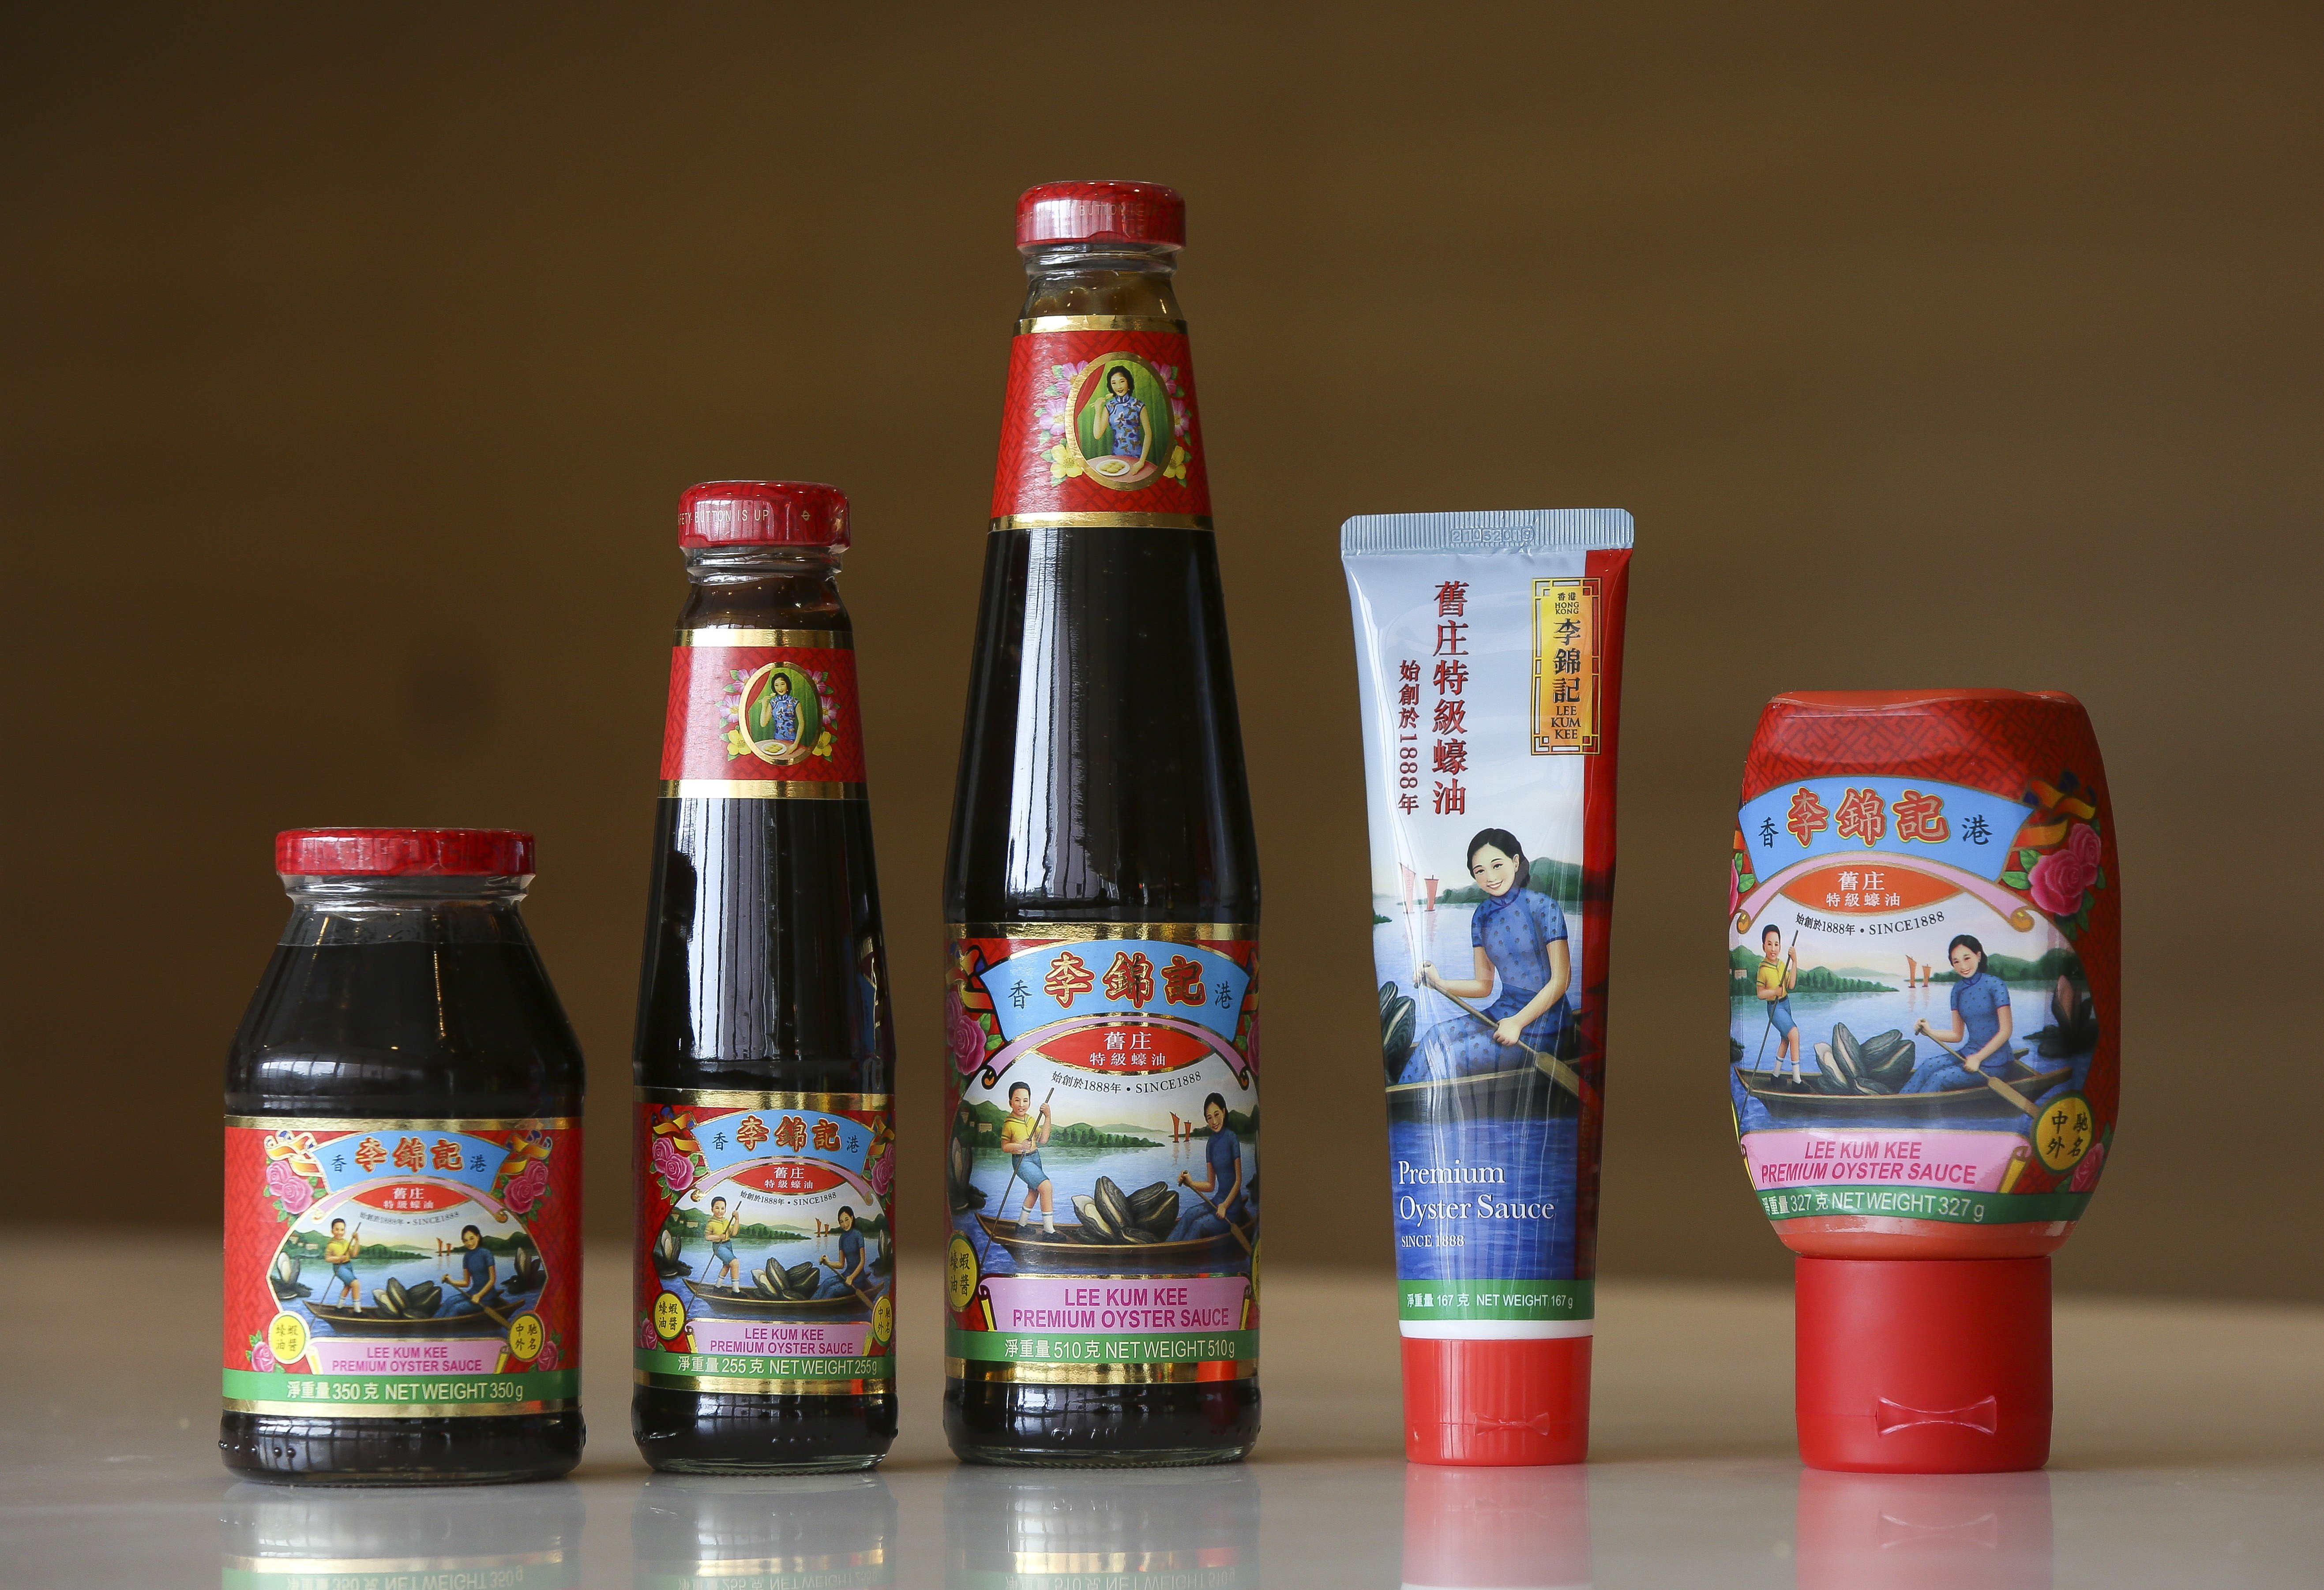 Lee Kum Kee’s premium line of oyster sauce. Picture: Xiaomei Chen